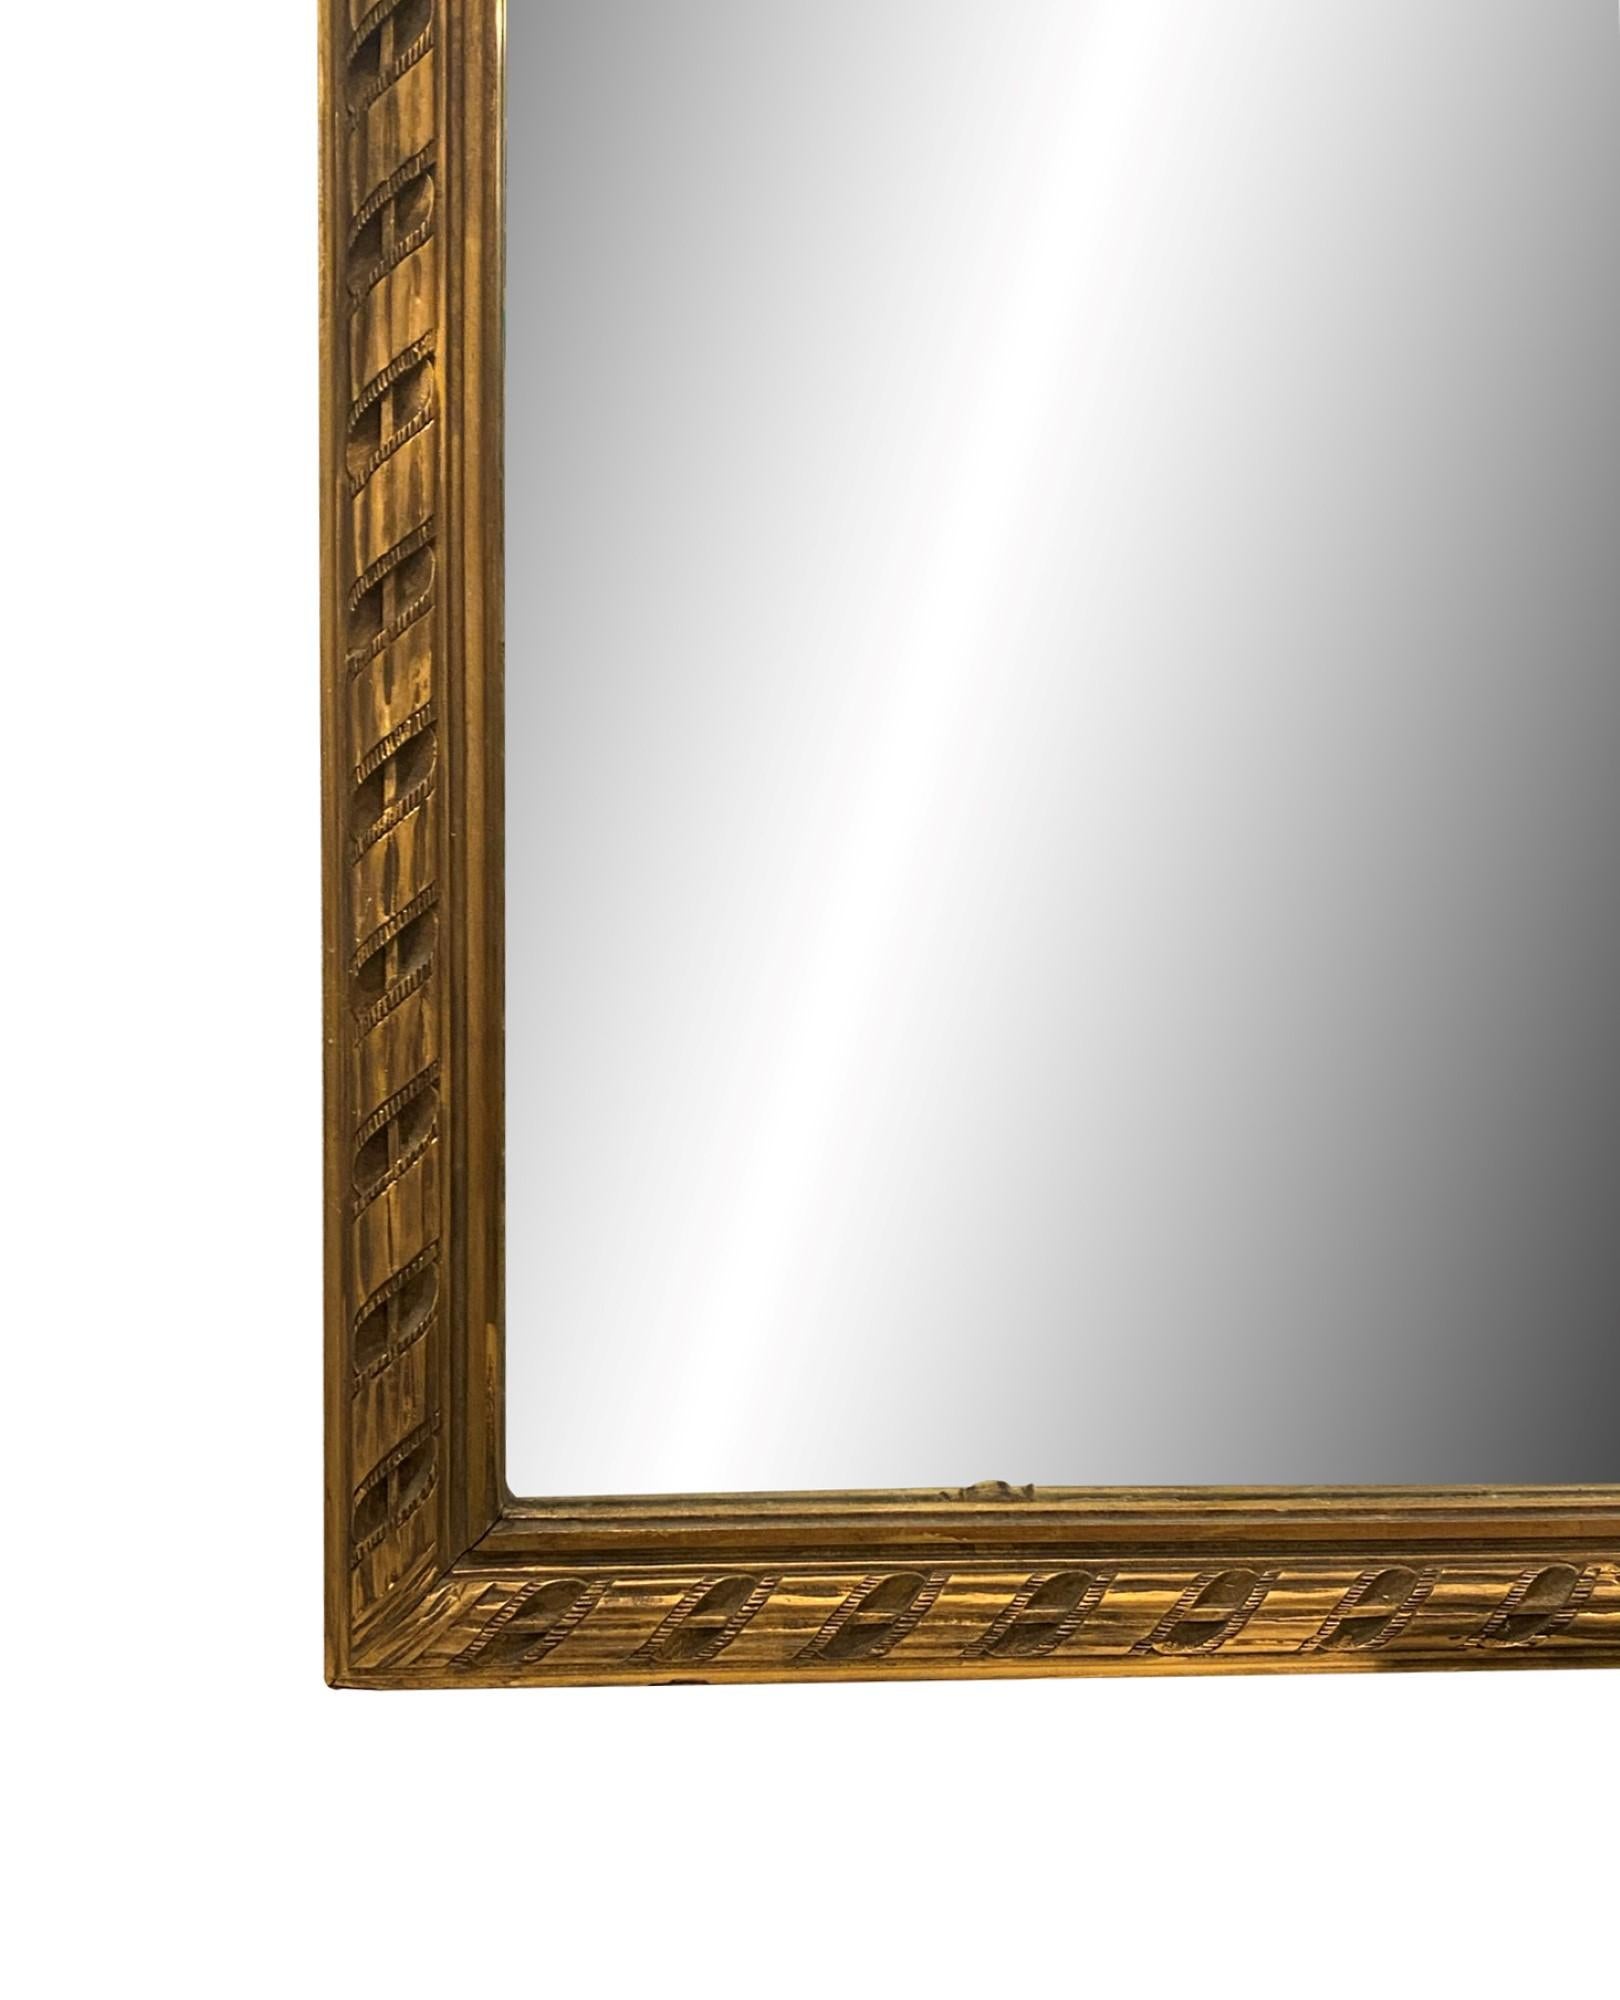 20th Century Early 20th C. Gilted Wood Mirror Louis XVI Style from France, Over Mantel